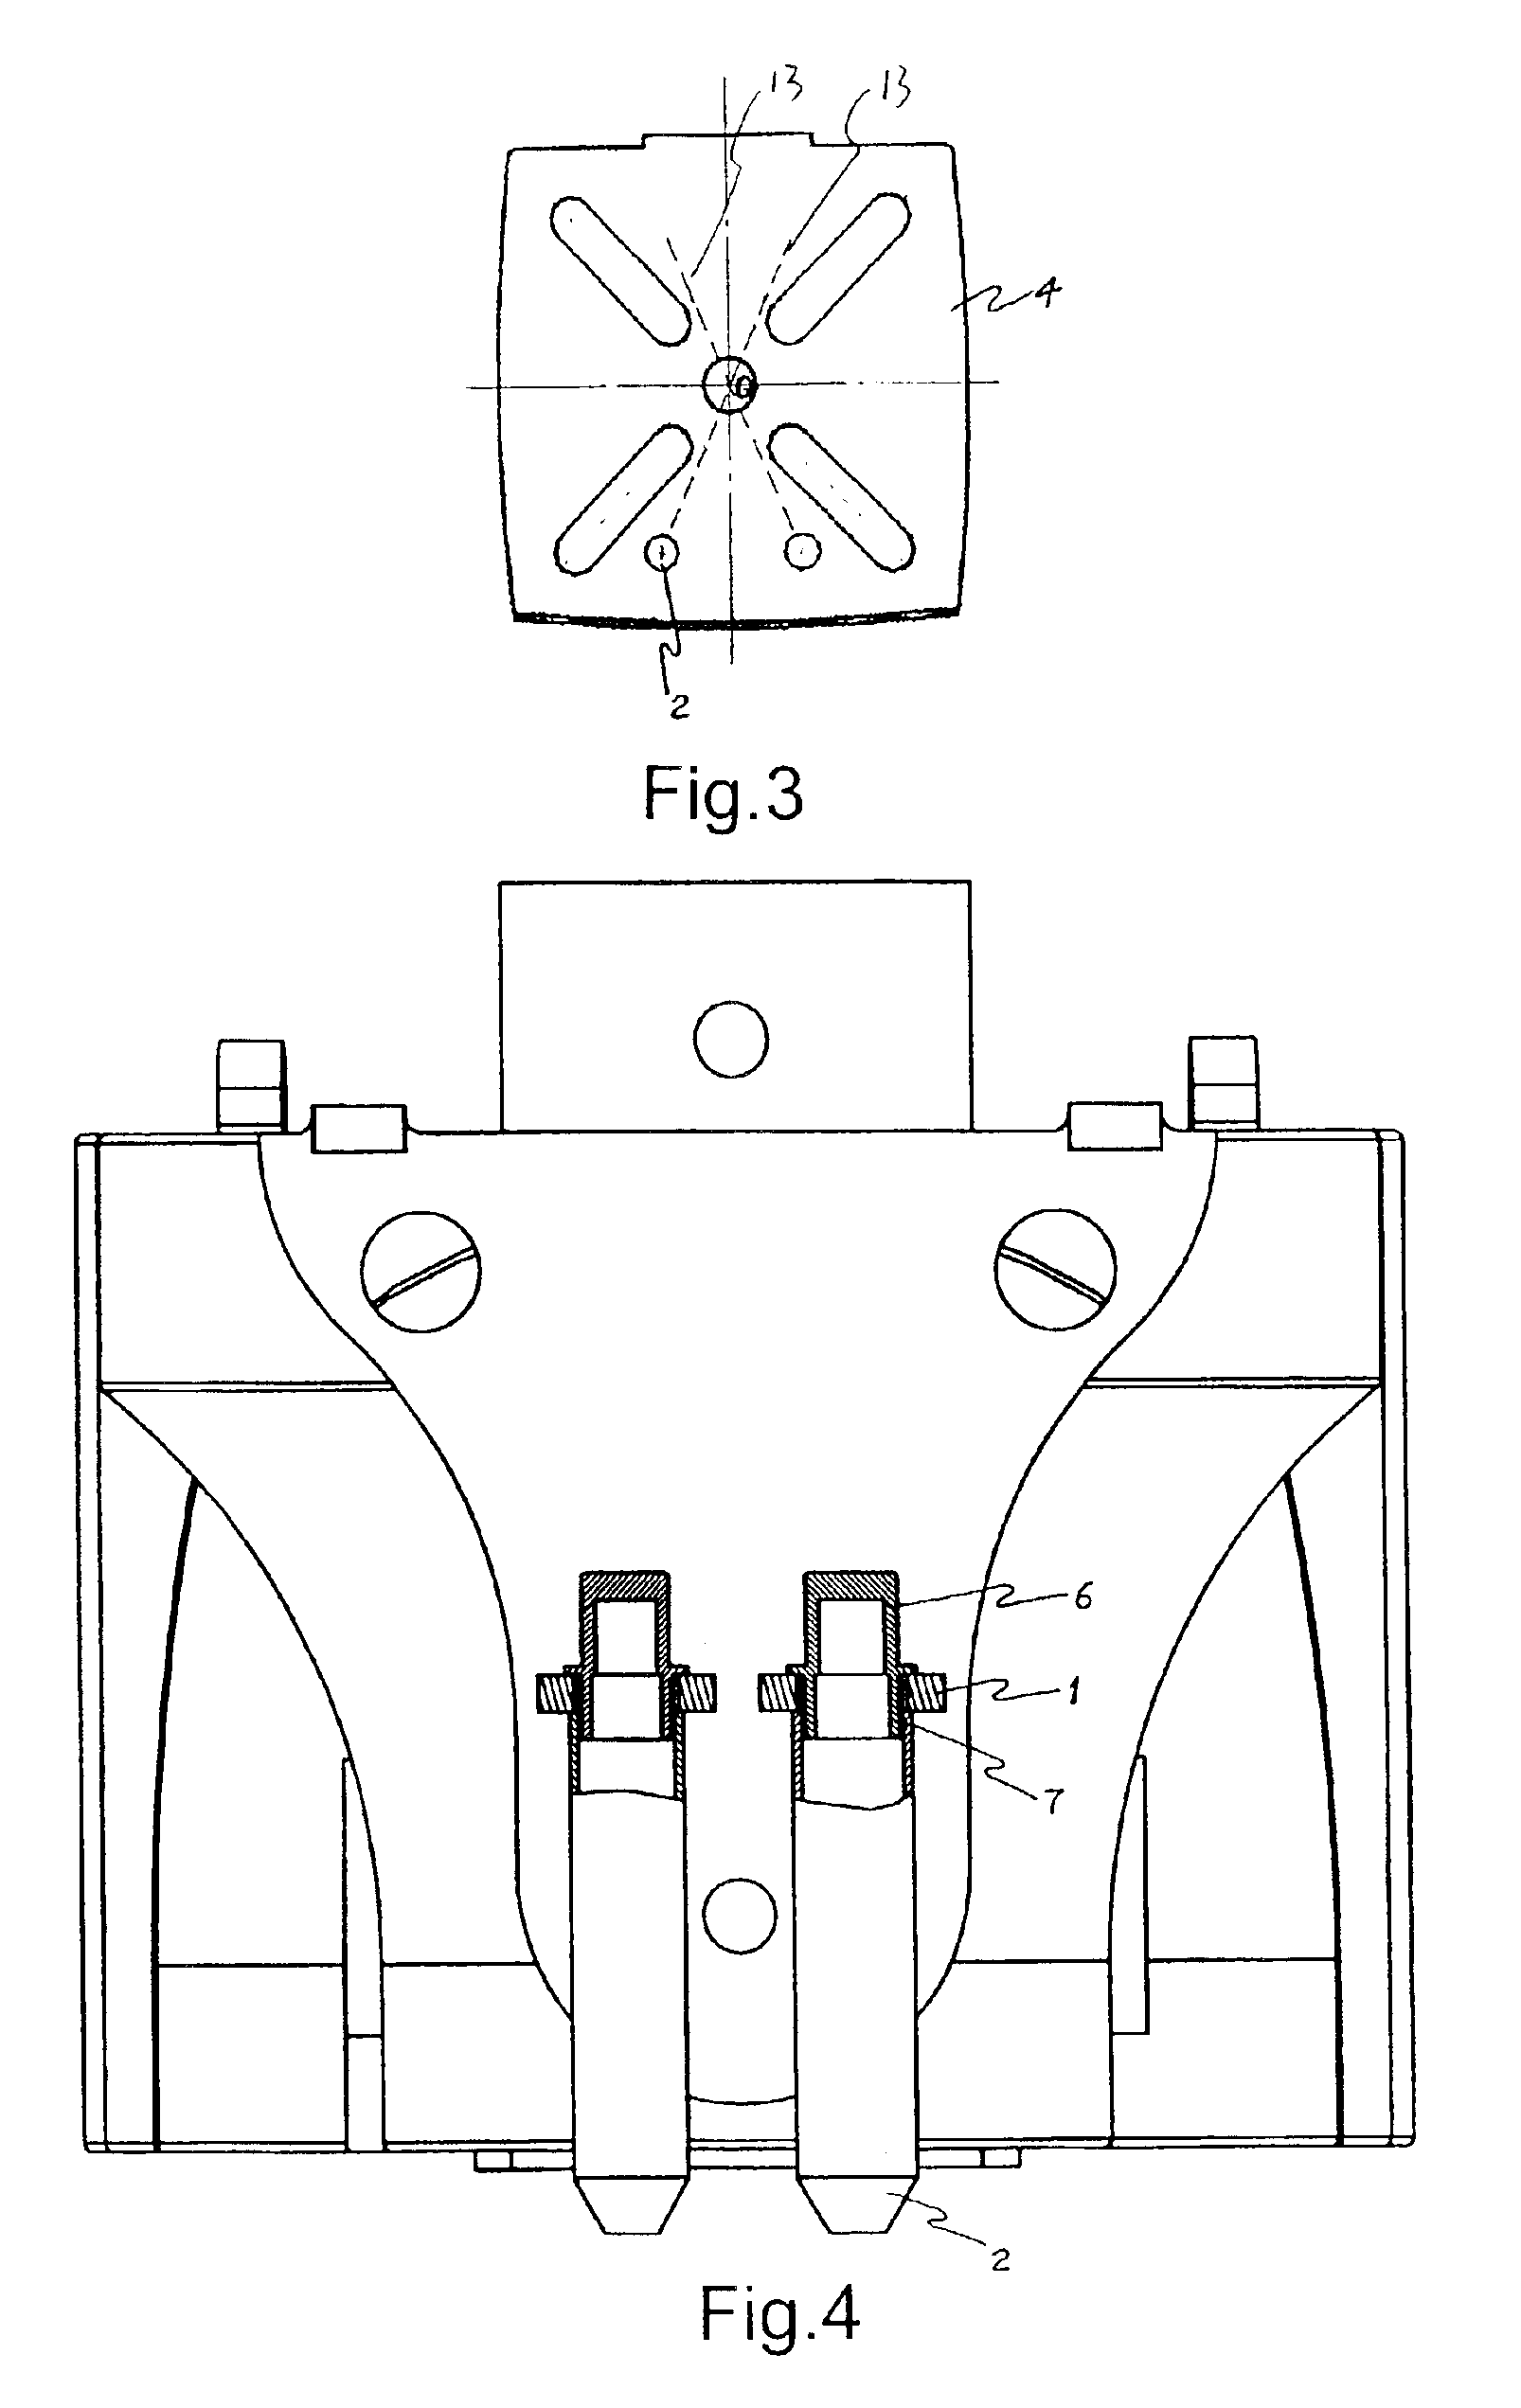 System of laser positioning of an aperture processing machine